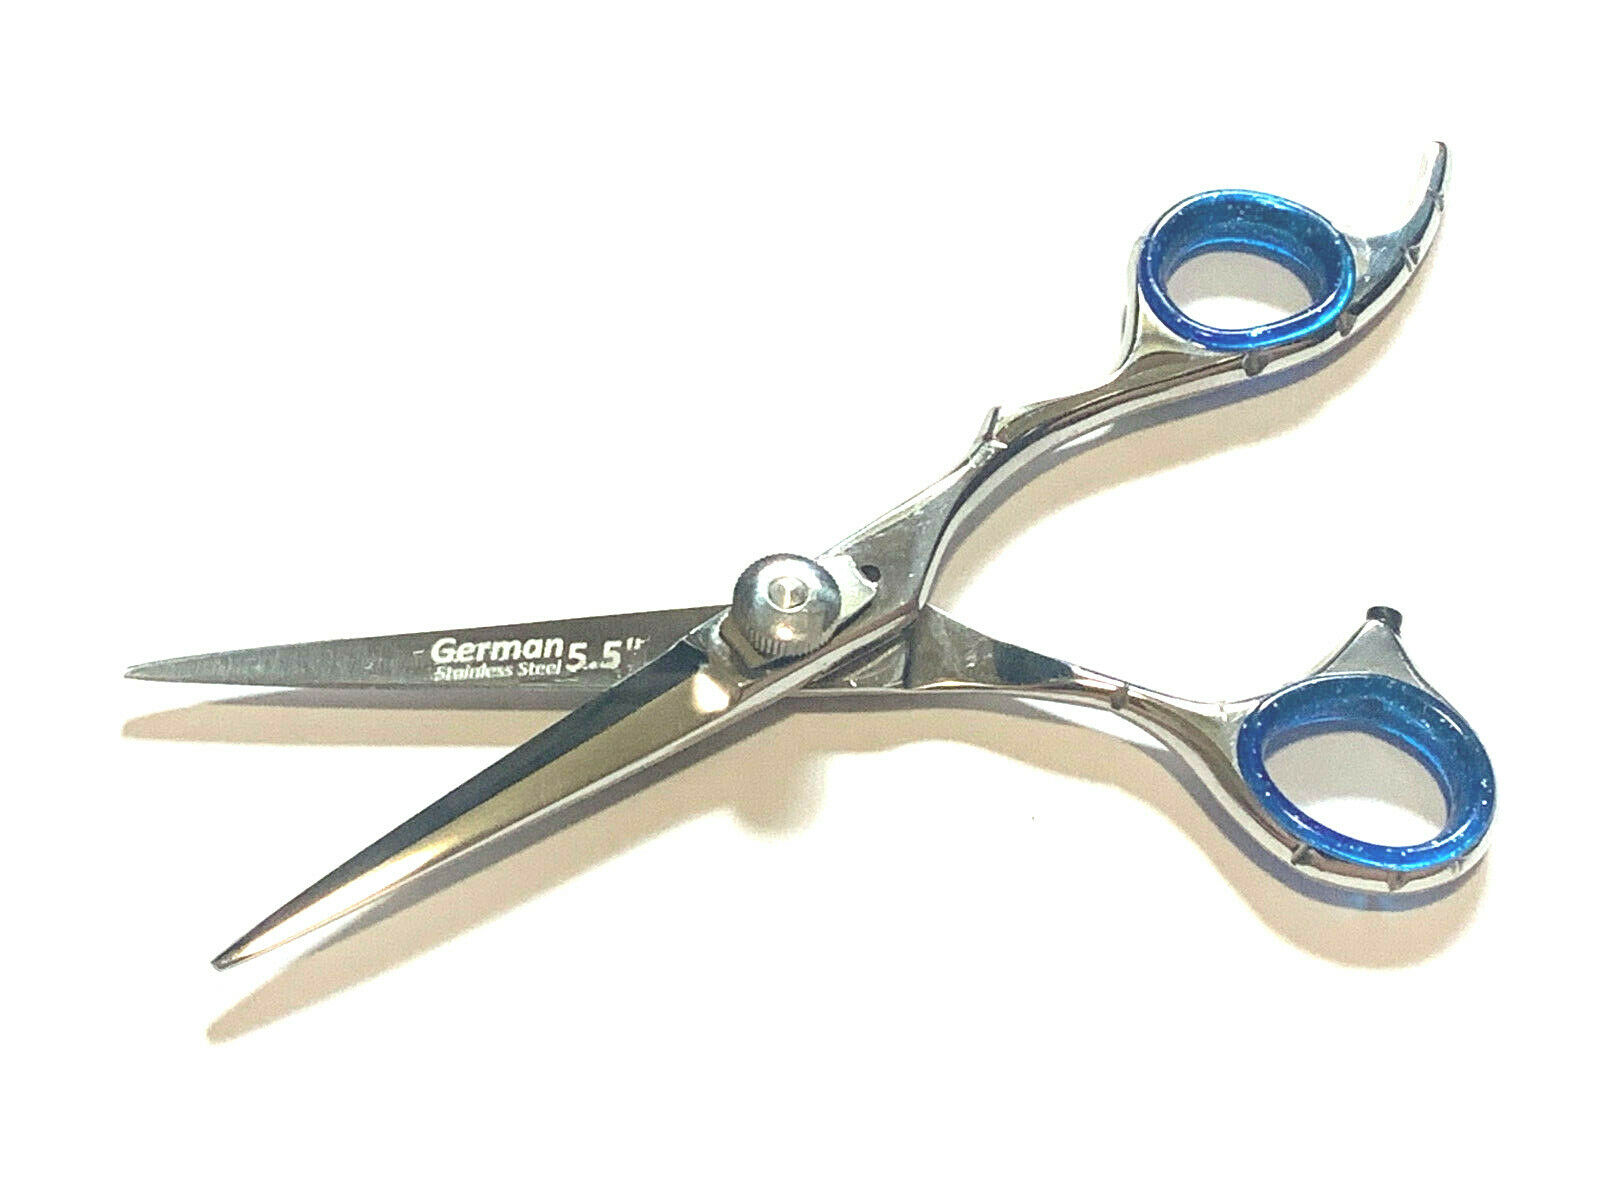 12 Tailor Sewing Shears Scissors - Hashir Products